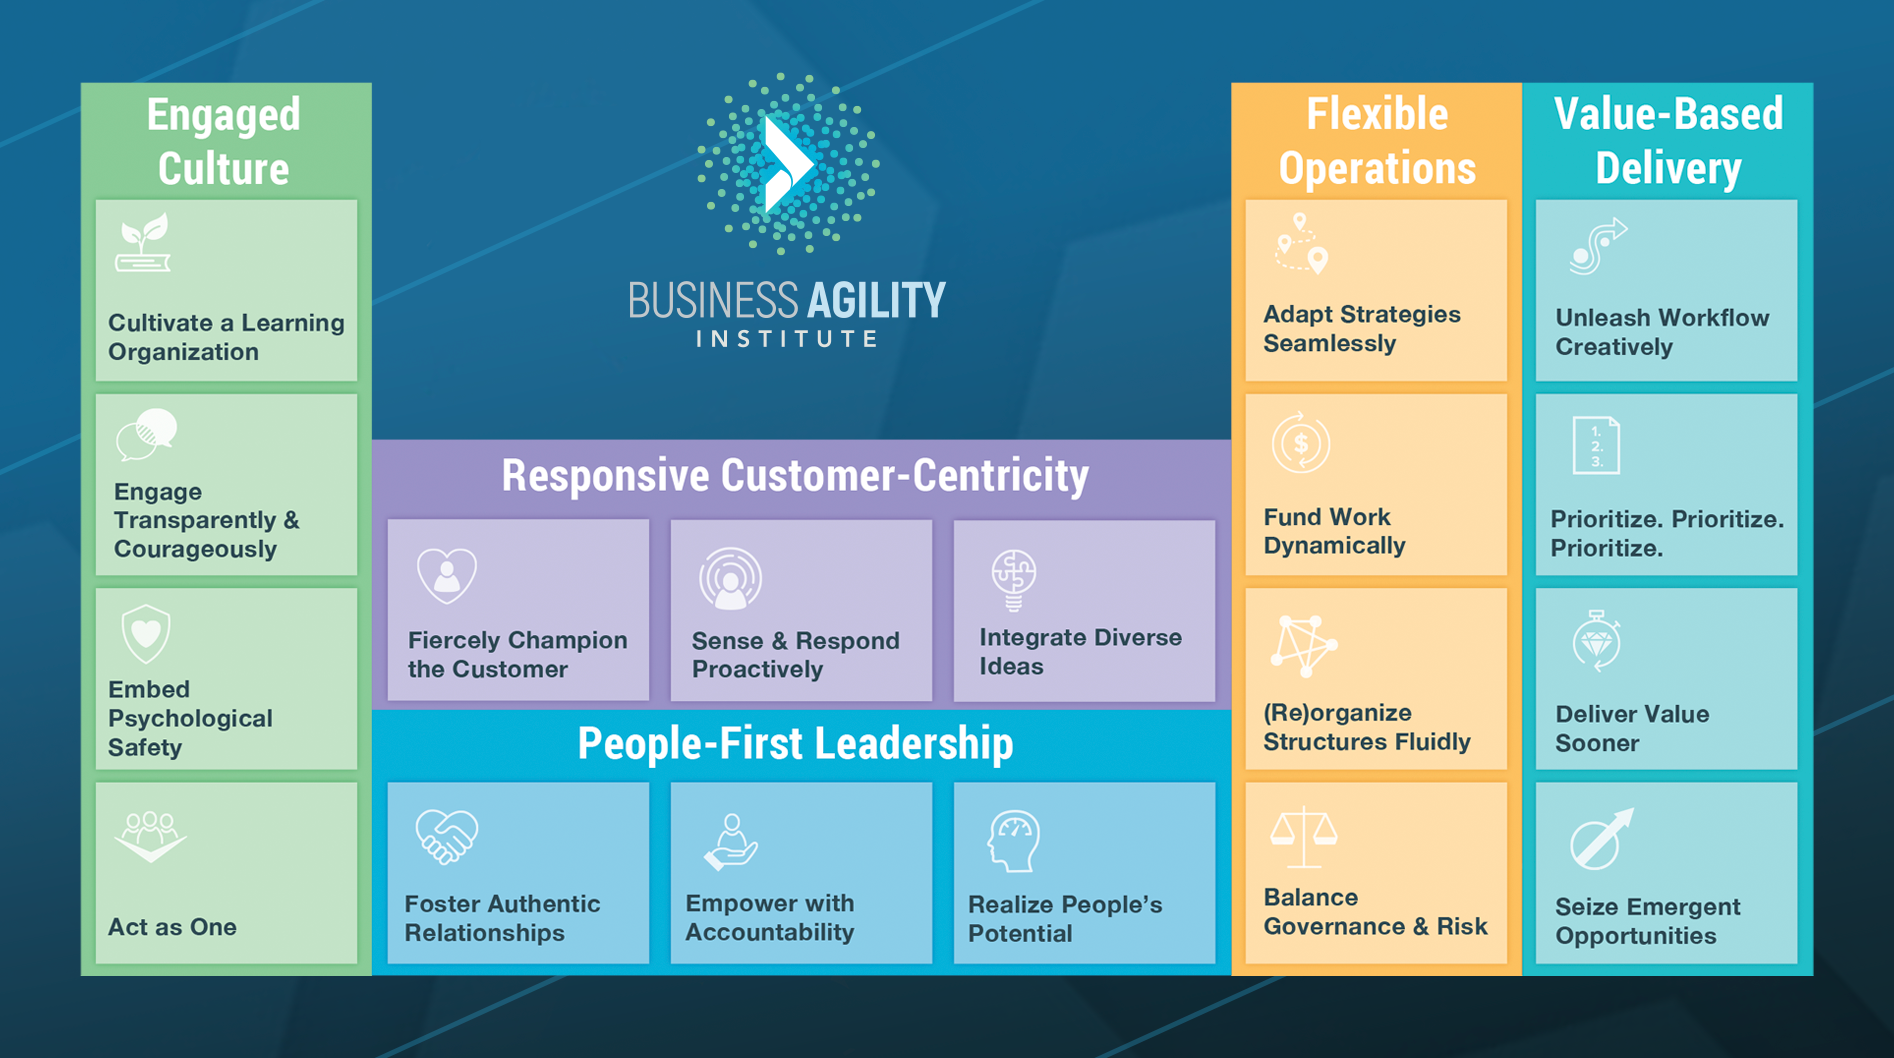 domains of business agility image